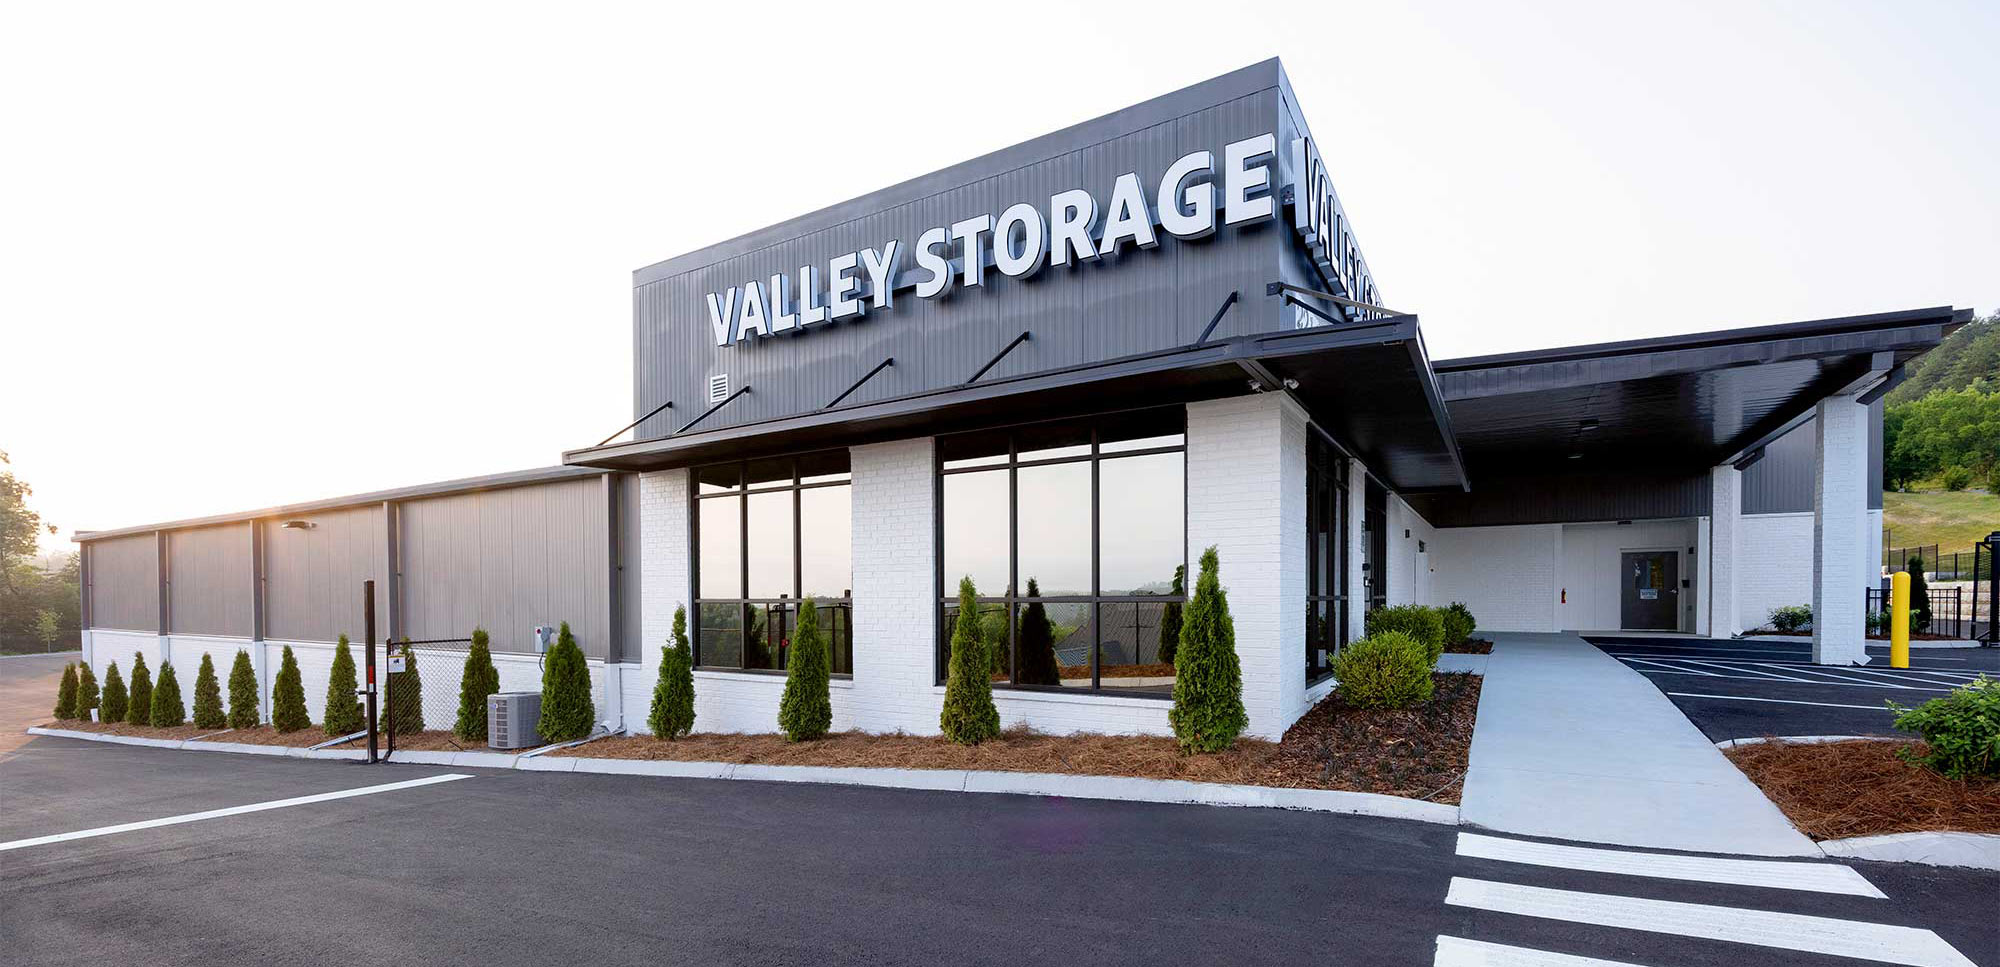 front view of Valley Storage building with accent greenery